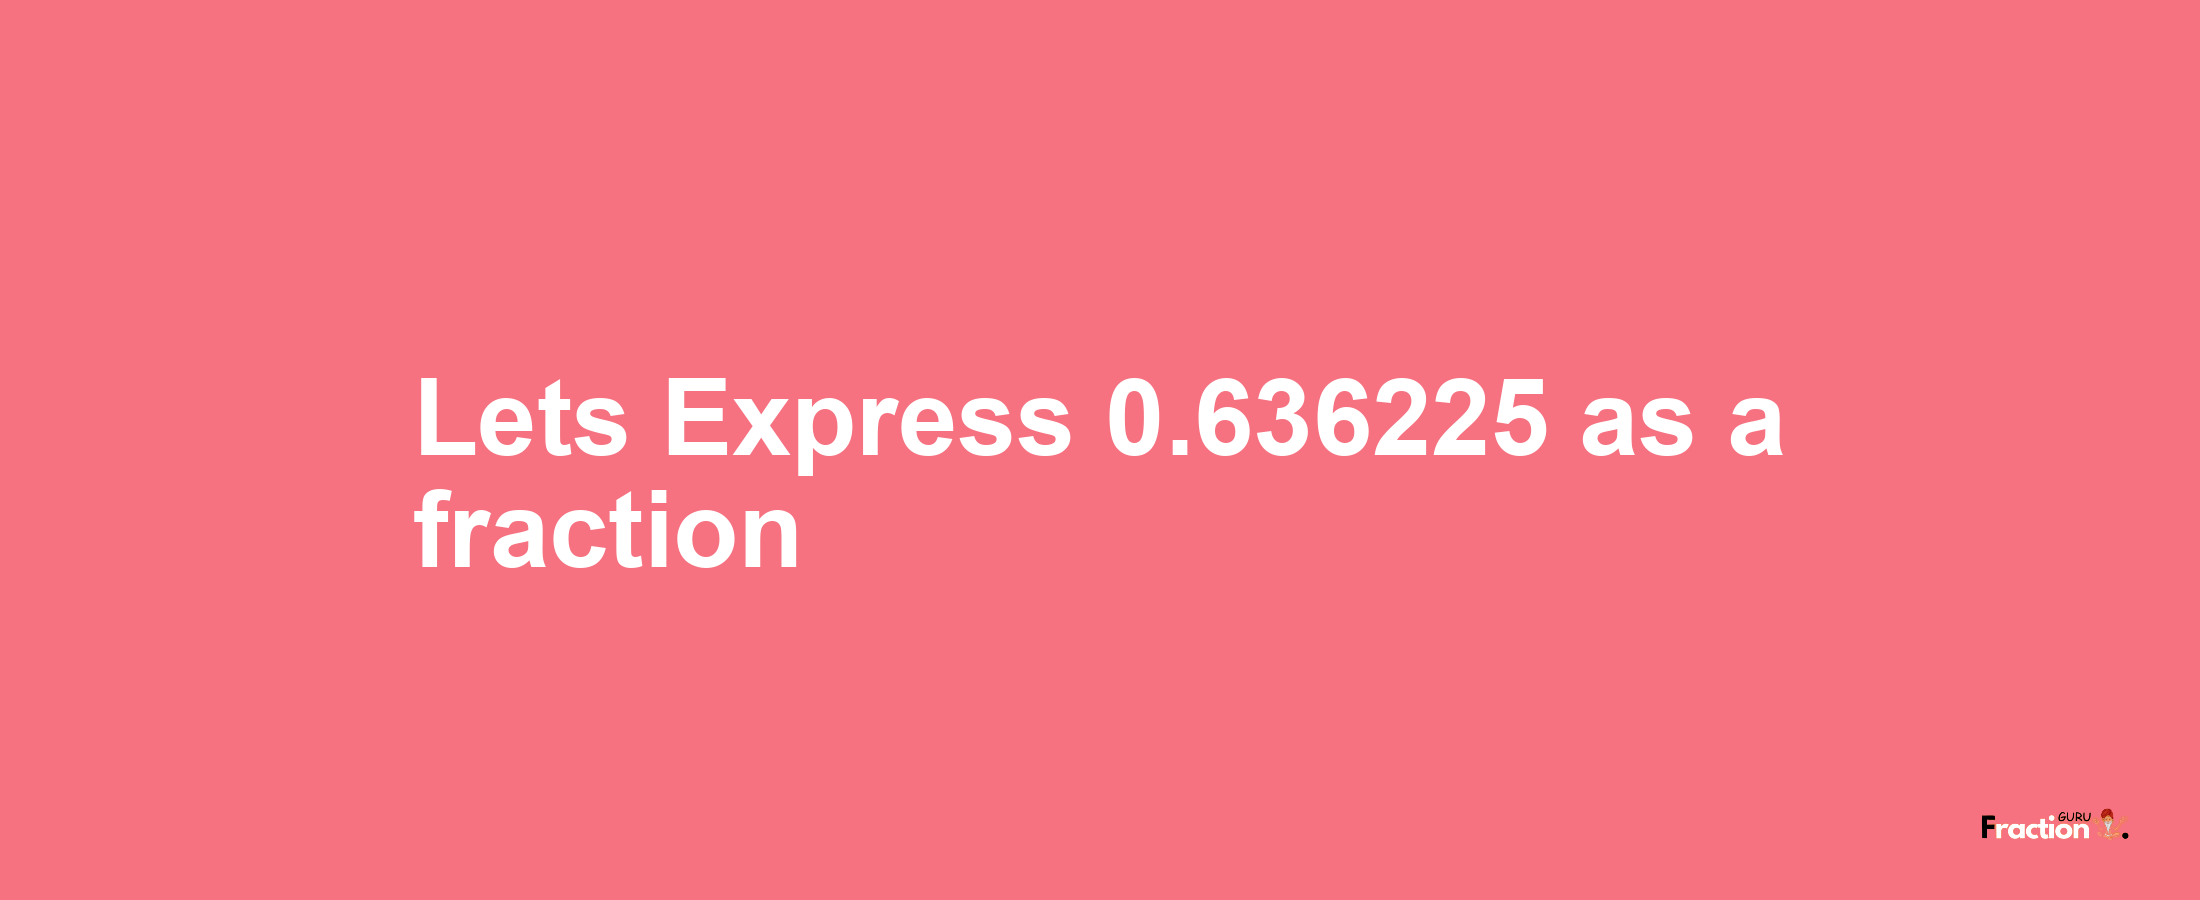 Lets Express 0.636225 as afraction